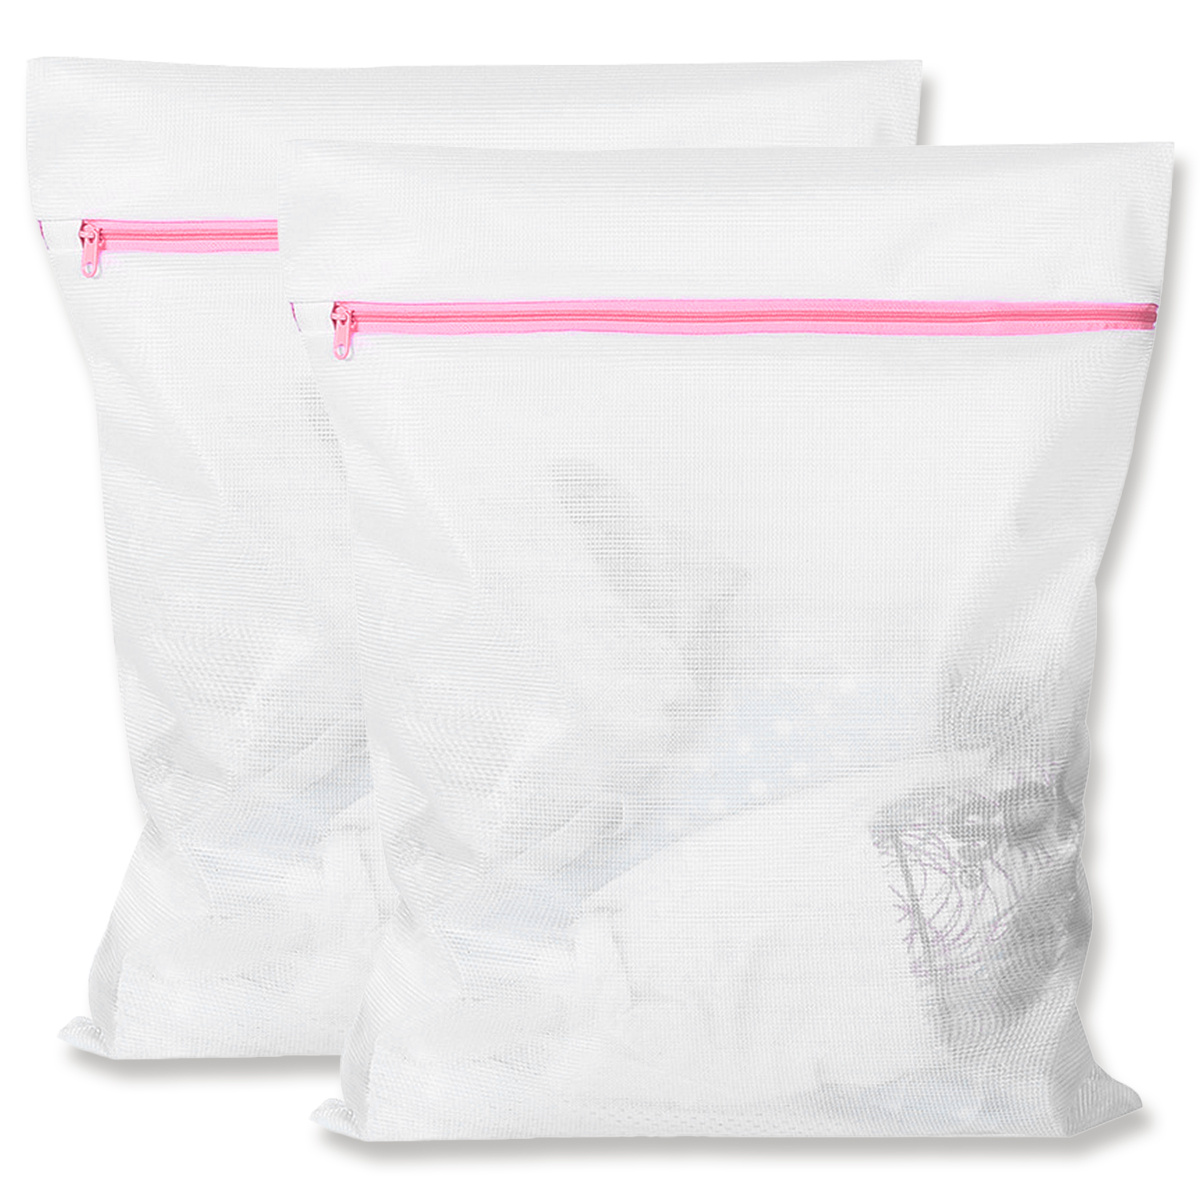 2pcs/Set Thickened Mesh Laundry Bags, Protective Polyester Zipper